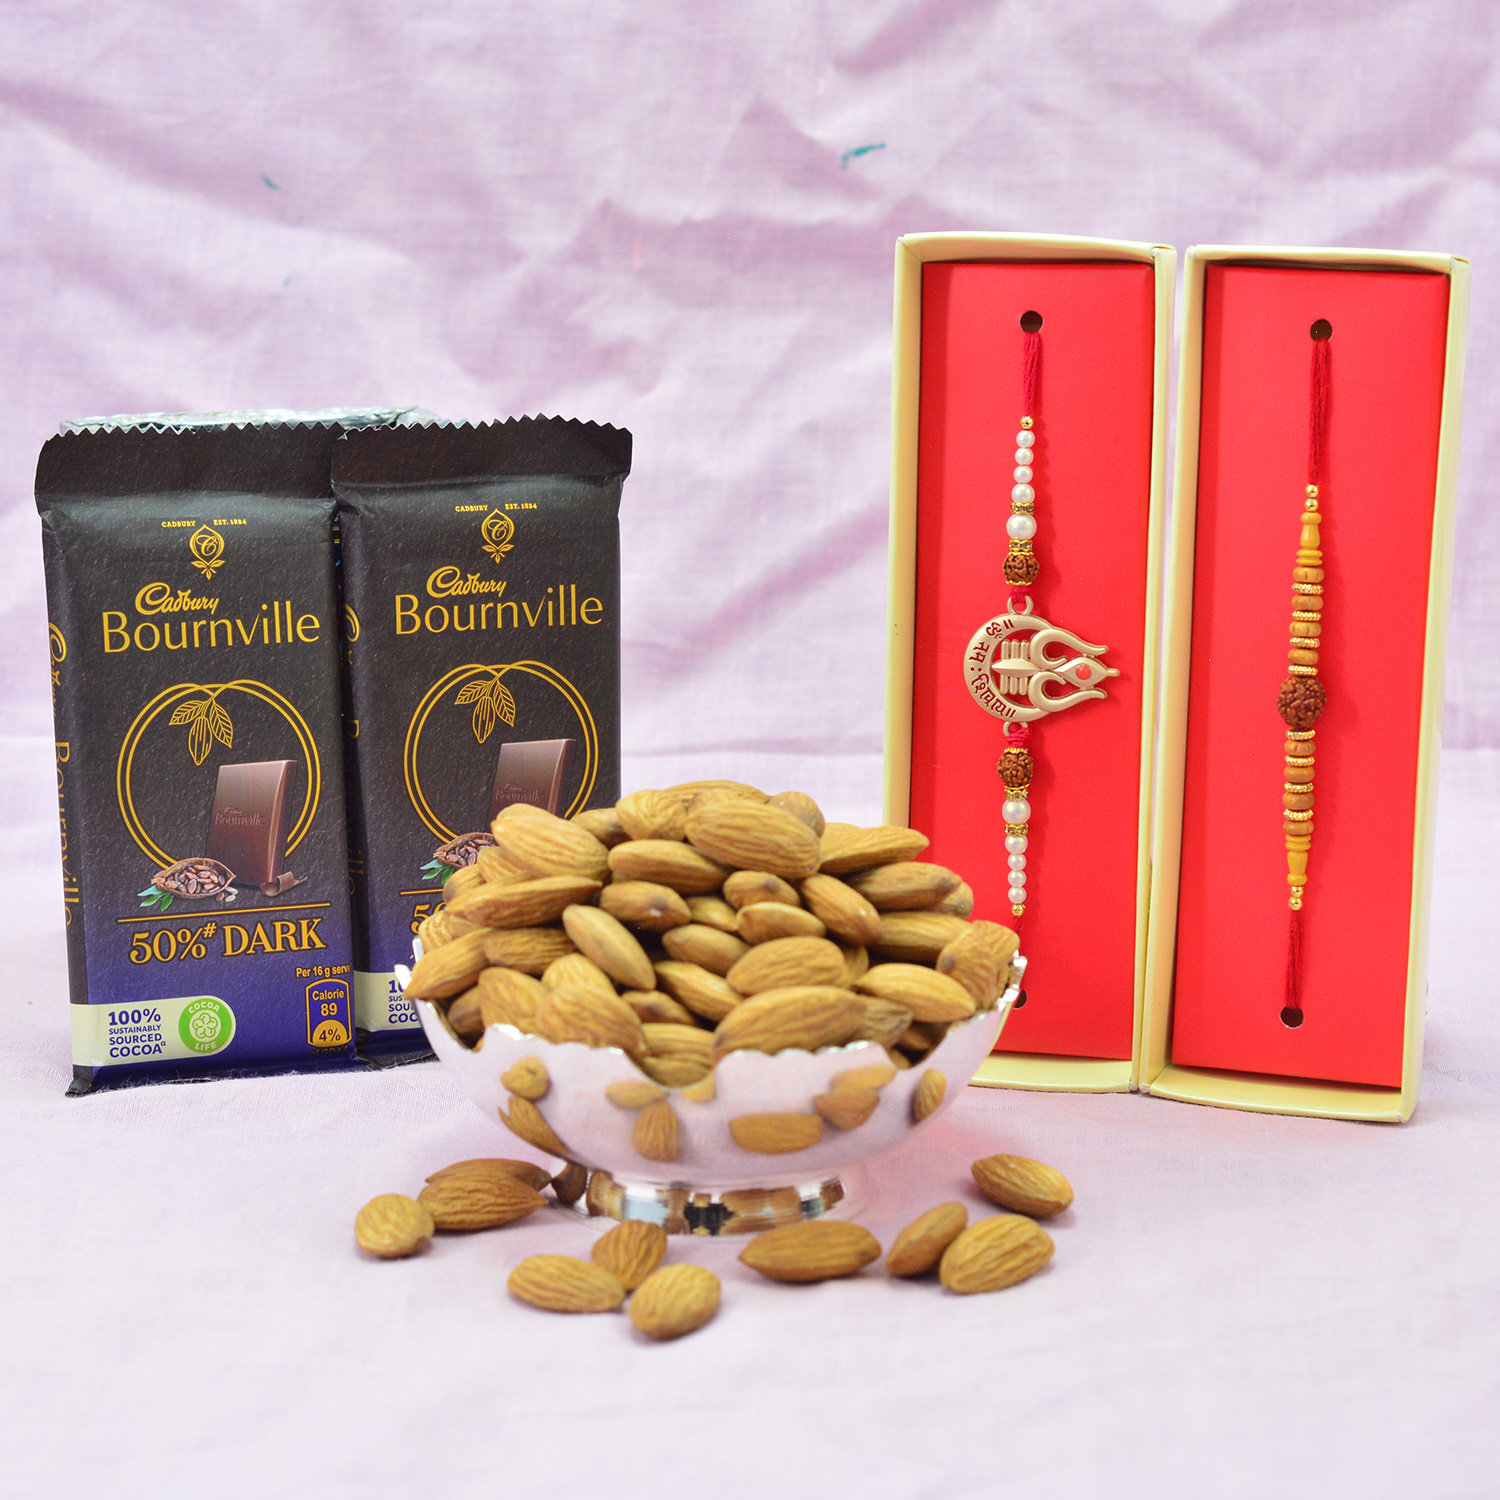 2 Brothers Amazing Rakhis with 2 Bourneville Chocolate and Almonds Dry Fruit Hamper